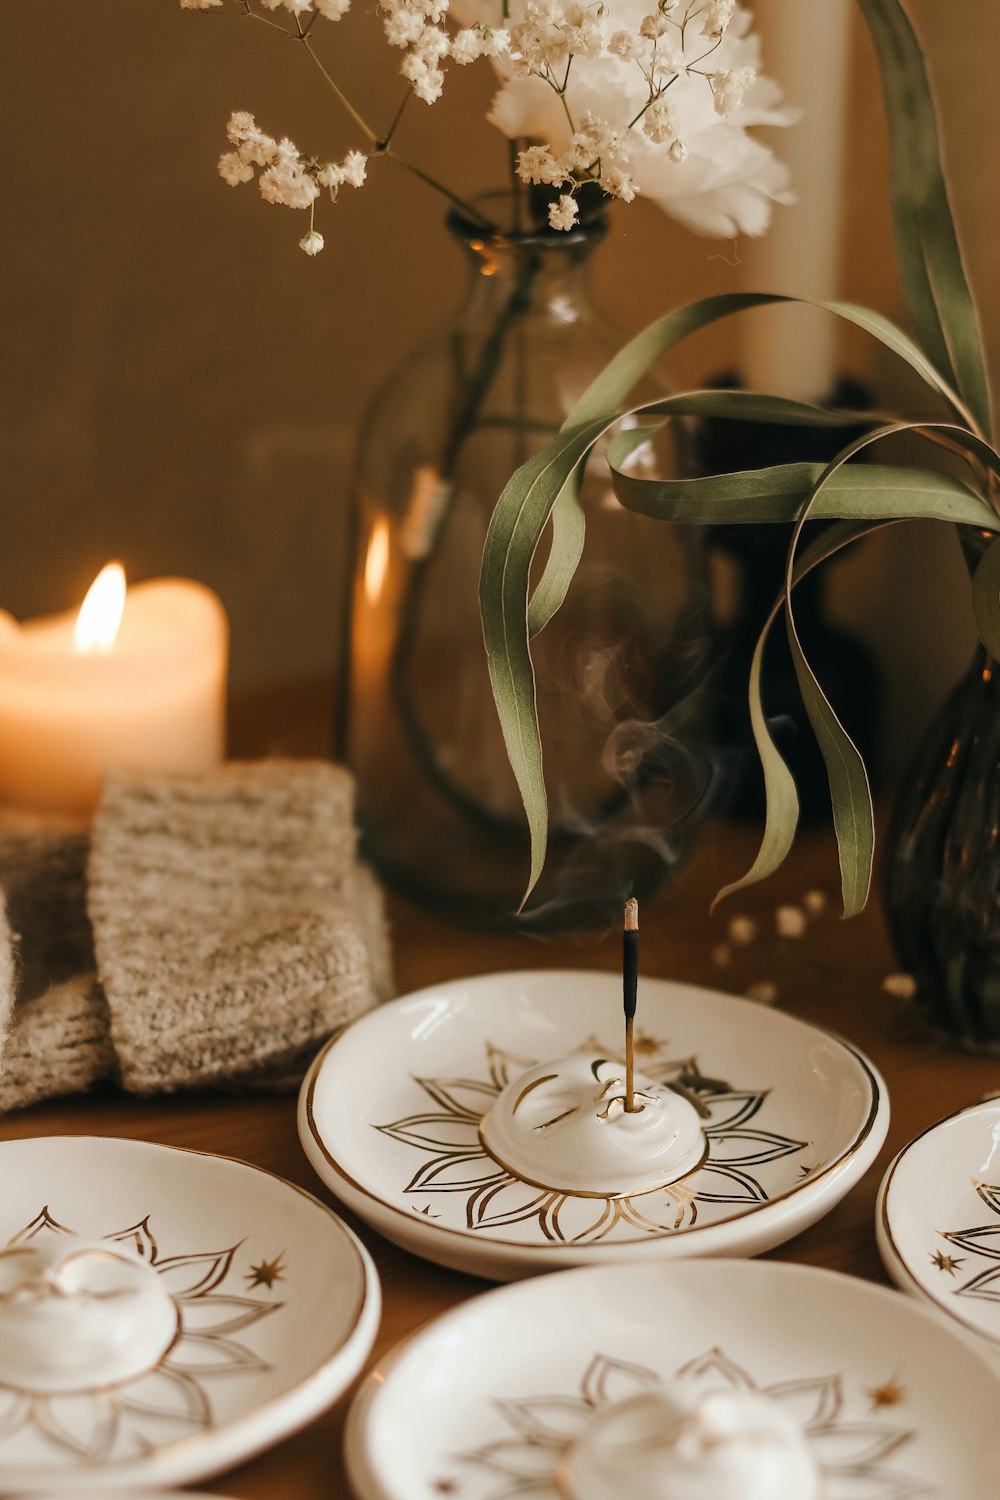 a close up of a plate with a candle in the background